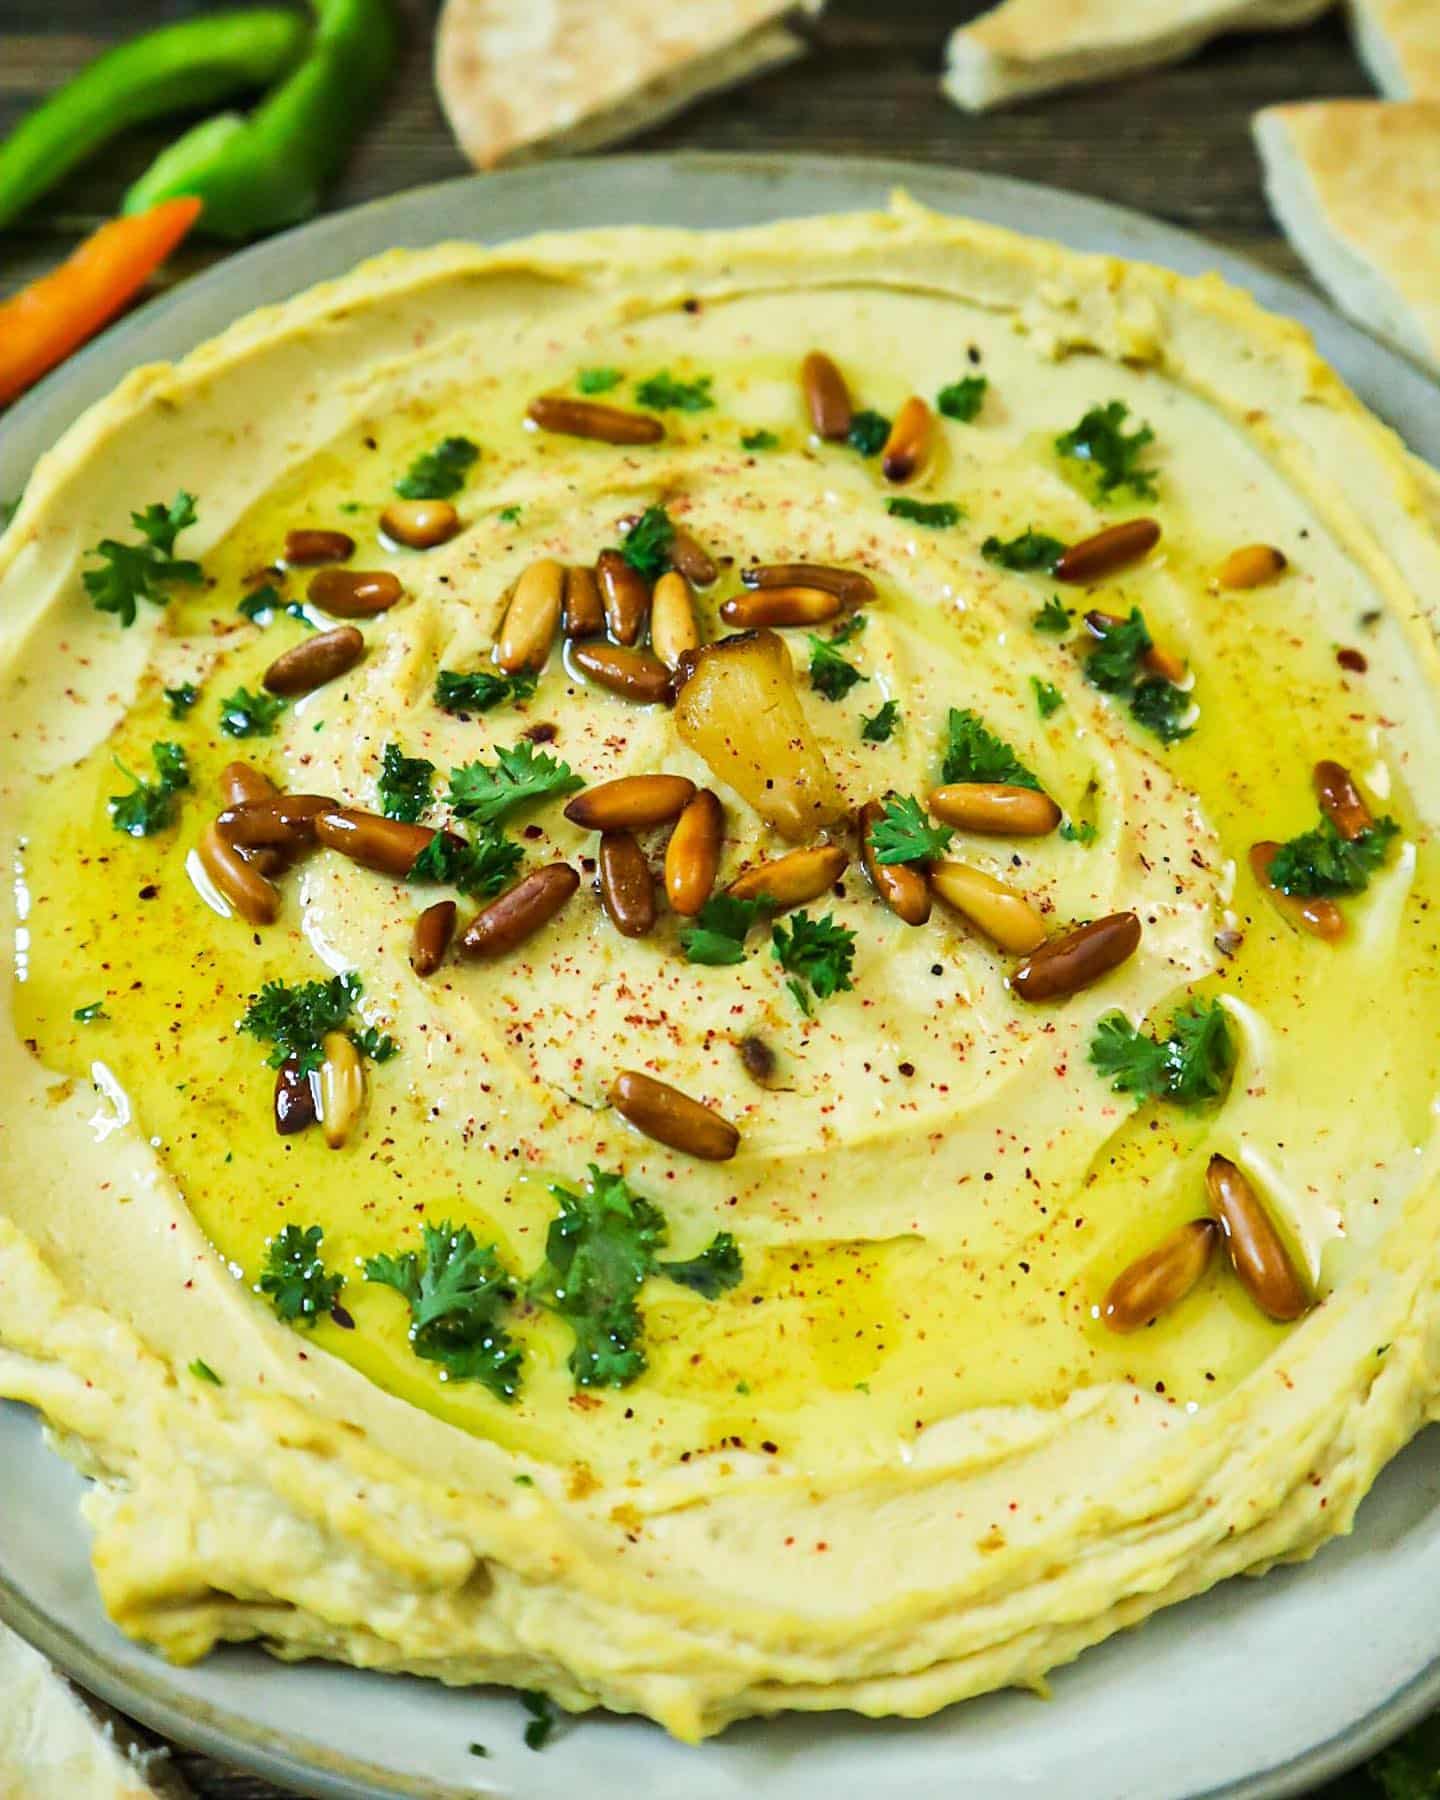 Garlic lovers gather up! This Roasted Garlic Hummus recipe is the one ❤️; It’s healthy, creamy, smokey, and of course, garlicky!

*Check out the recipe and let me know what you think 🙂. 

*Want the recipe? Tap @eatenjoybyraneem and click the link in my profile description below the pic.

.
.
.
.
.

#hummus #roastedgarlic #roastedgarlichummus #roasted #food #vegan #foodie #foodporn #feedfeed #f52grams #todayfood #healthyfood #instafood #foodphotography #veganfood #yummy #vegetarian #foodstagram #foodblogger #hummuslover #plantbased #delicious #middleeasternfood #homemade #pita #chickpeas #hummusrecipe #bhfyp